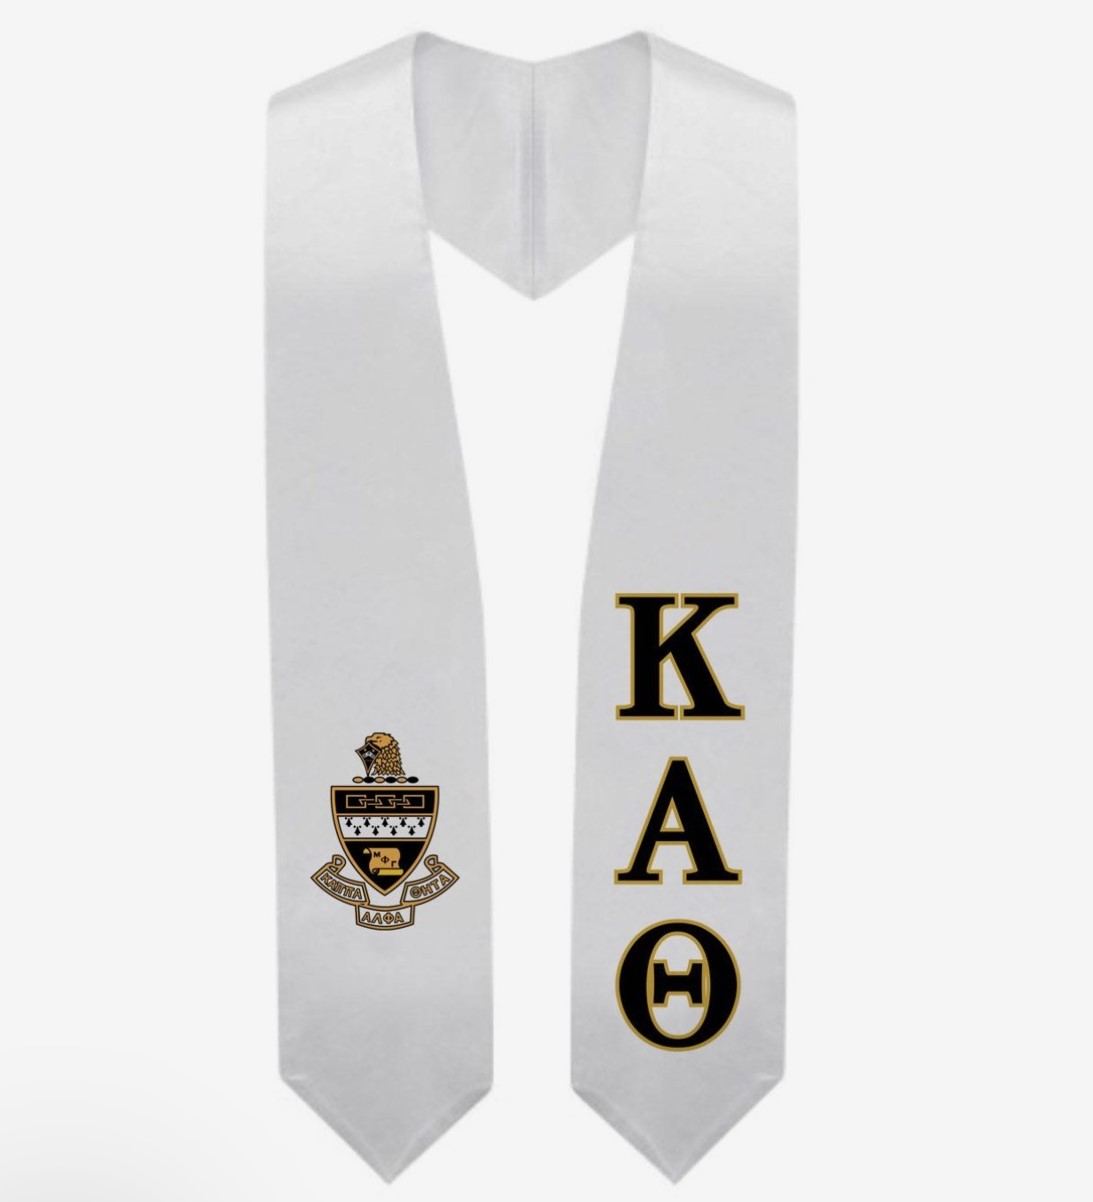 White stole with Kappa Alpha Theta letters